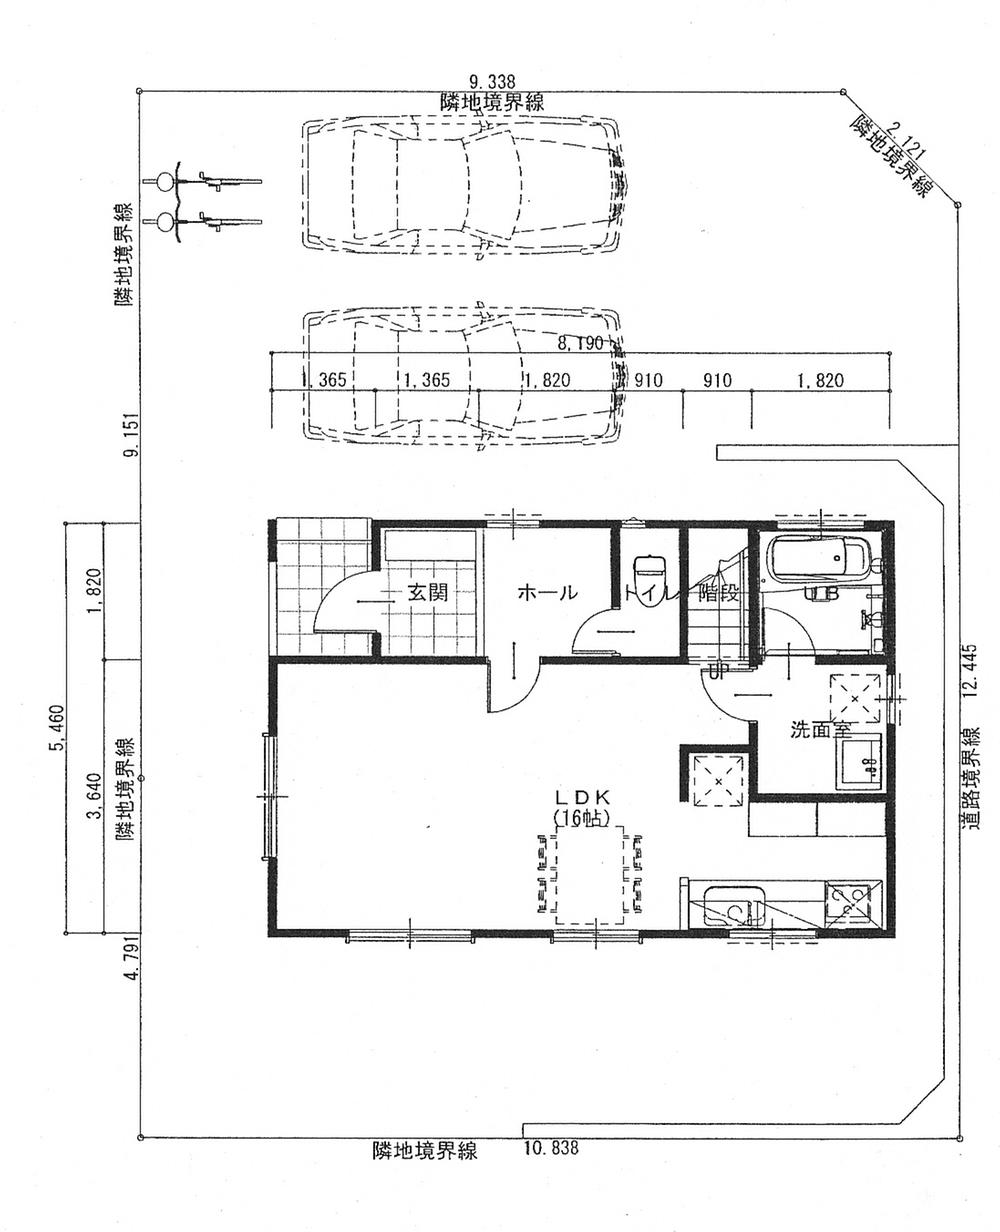 Other building plan example. Building plan example ( No. 5 areas ・ First floor) building price 12,790,000 yen, Building area 86.94 sq m (26.3 square meters), Land area 150 sq m (45.37 square meters)